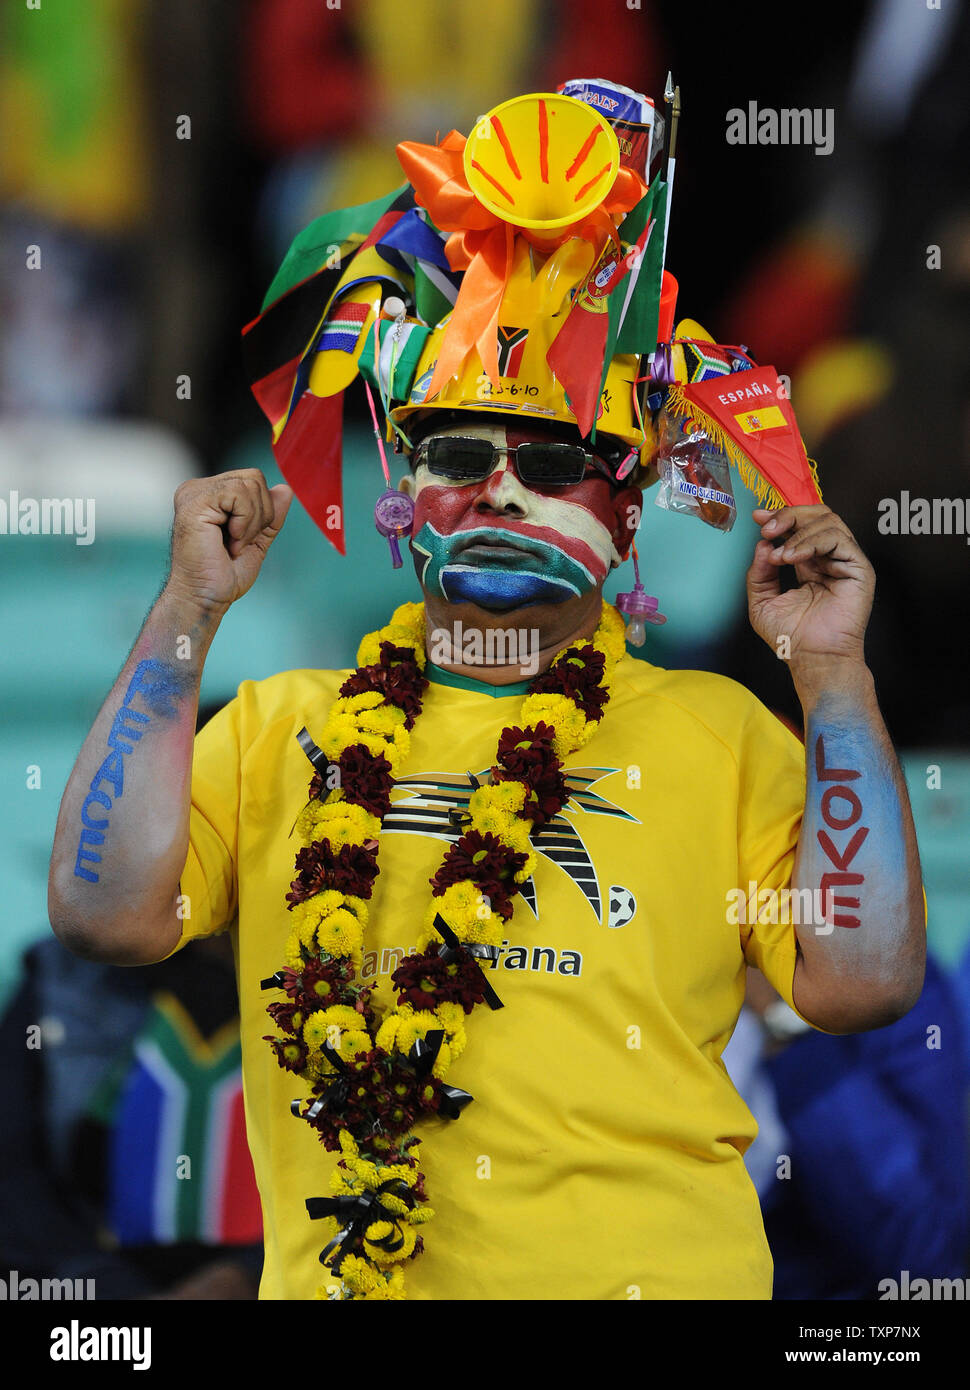 A local fan looks on prior to the FIFA World Cup Semi Final match at the Moses Mabhida Stadium in Durban, South Africa on July 7, 2010. UPI/Chris Brunskill Stock Photo